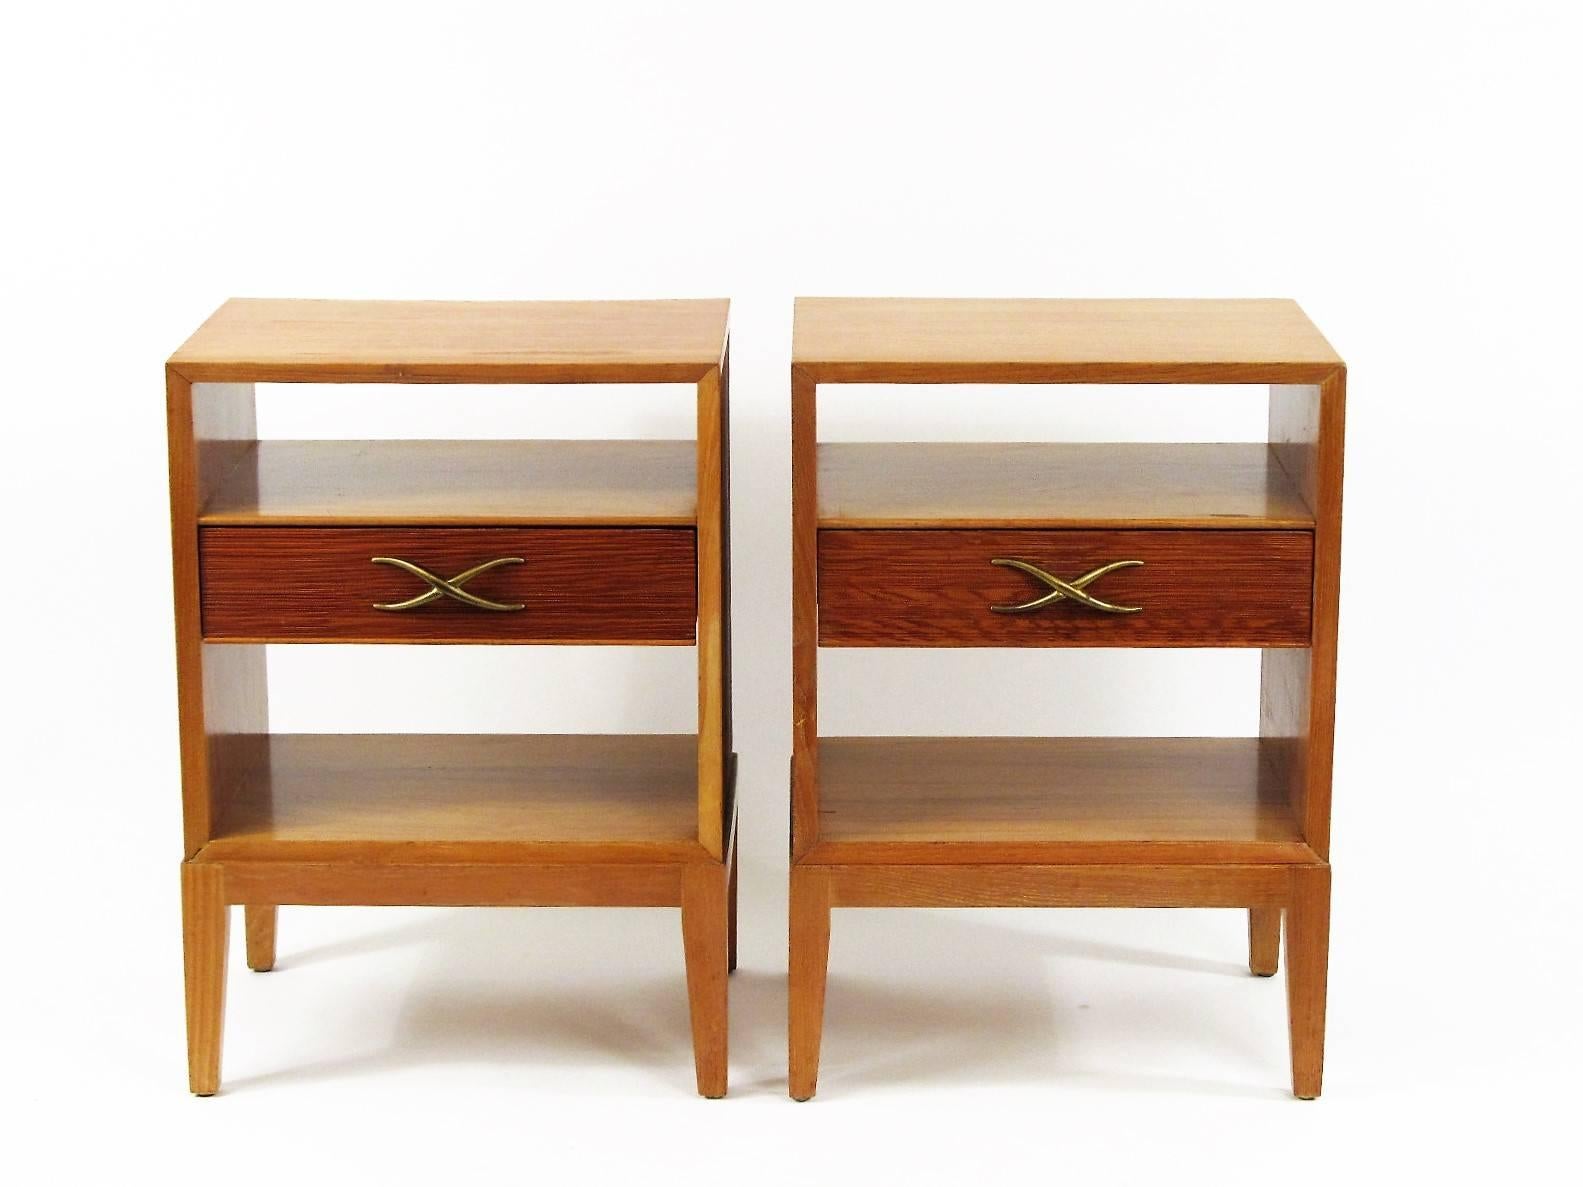 Paul Frankl was a leading American designer in the 1930s and 1940s. His oeuvre varied from Art Deco, to Asian inspired Mid-Century design. The night stands feature Frankl's signature combed wood exterior and X-drawer pulls.